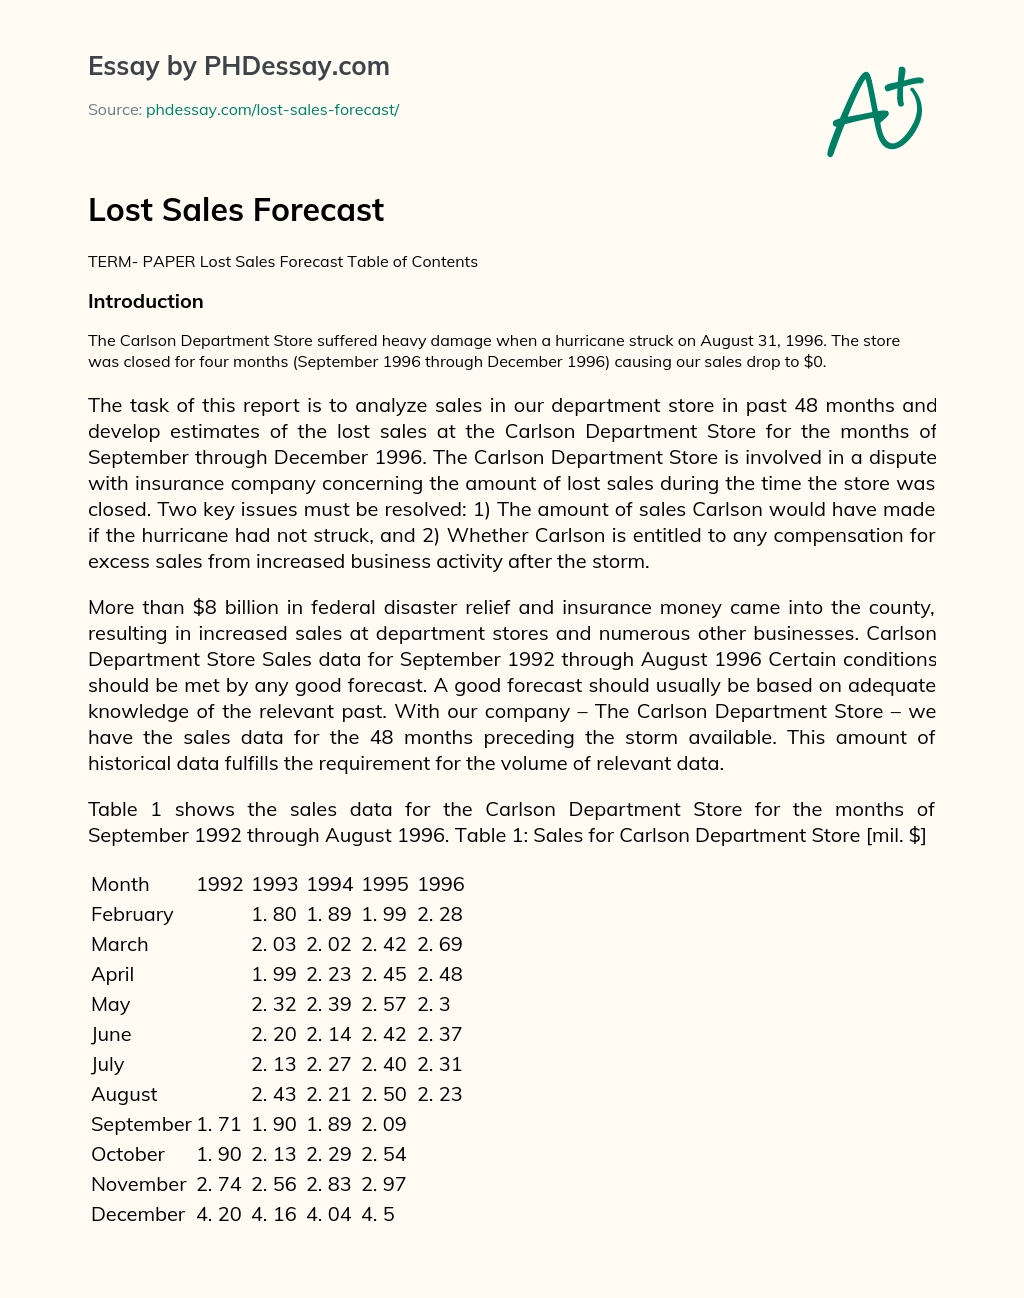 Lost Sales Forecast essay